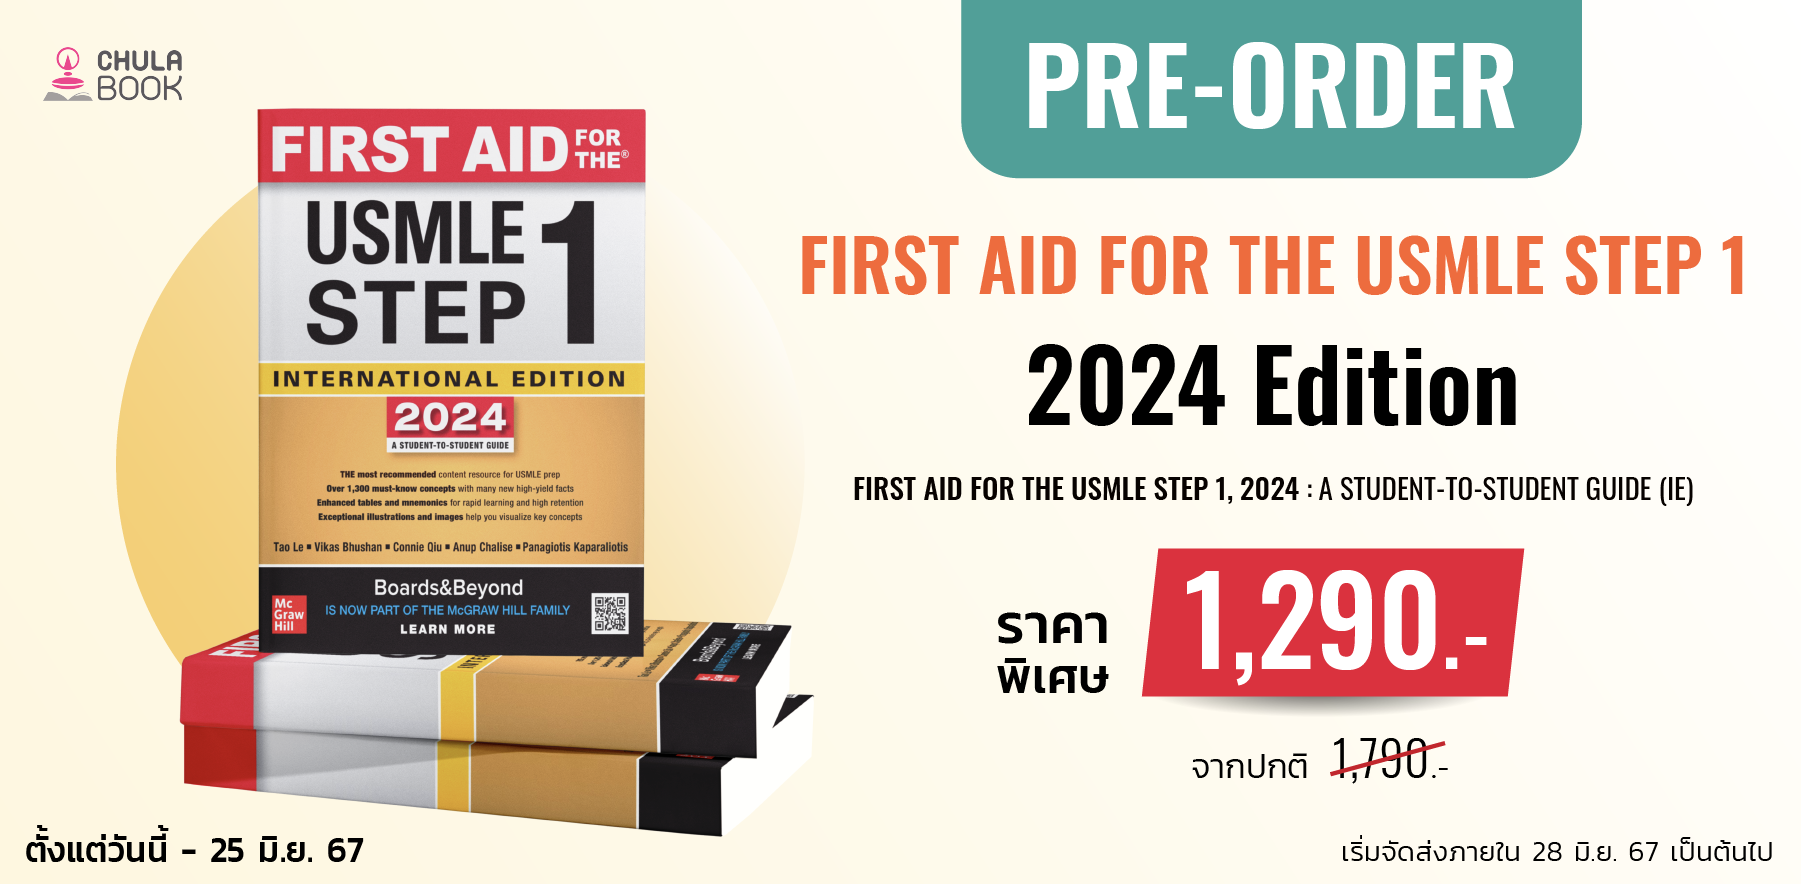 PRE-ORDER FIRST AID FOR THE USMLE STEP 1, 2024: A STUDENT-TO-STUDENT GUIDE (IE)